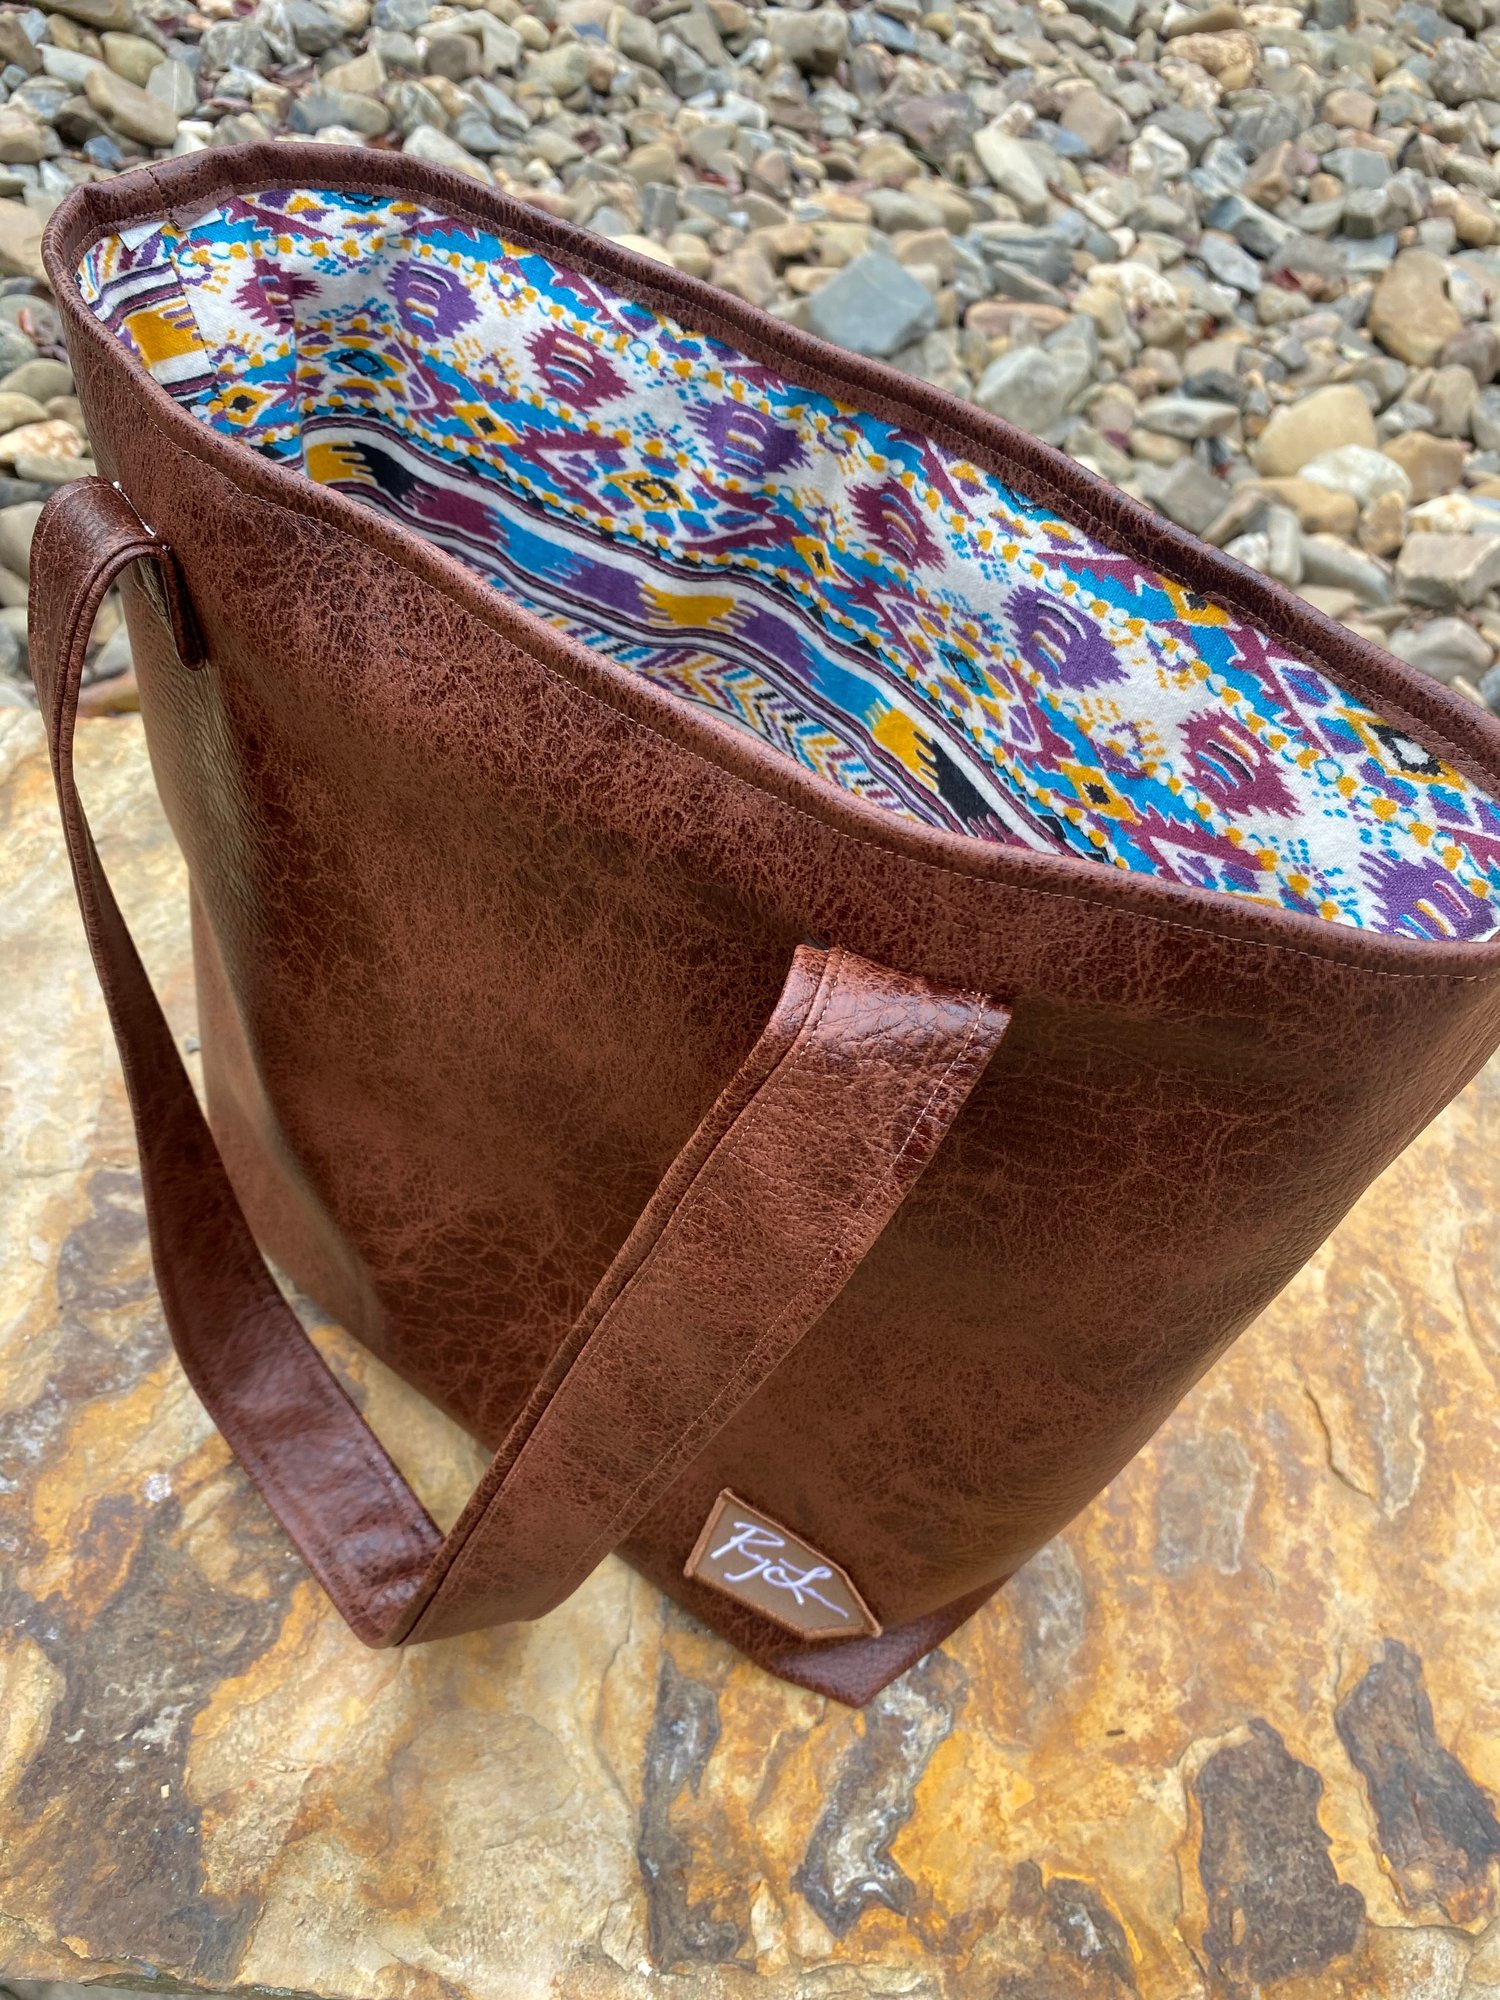 Image of “THE” Leather tote!